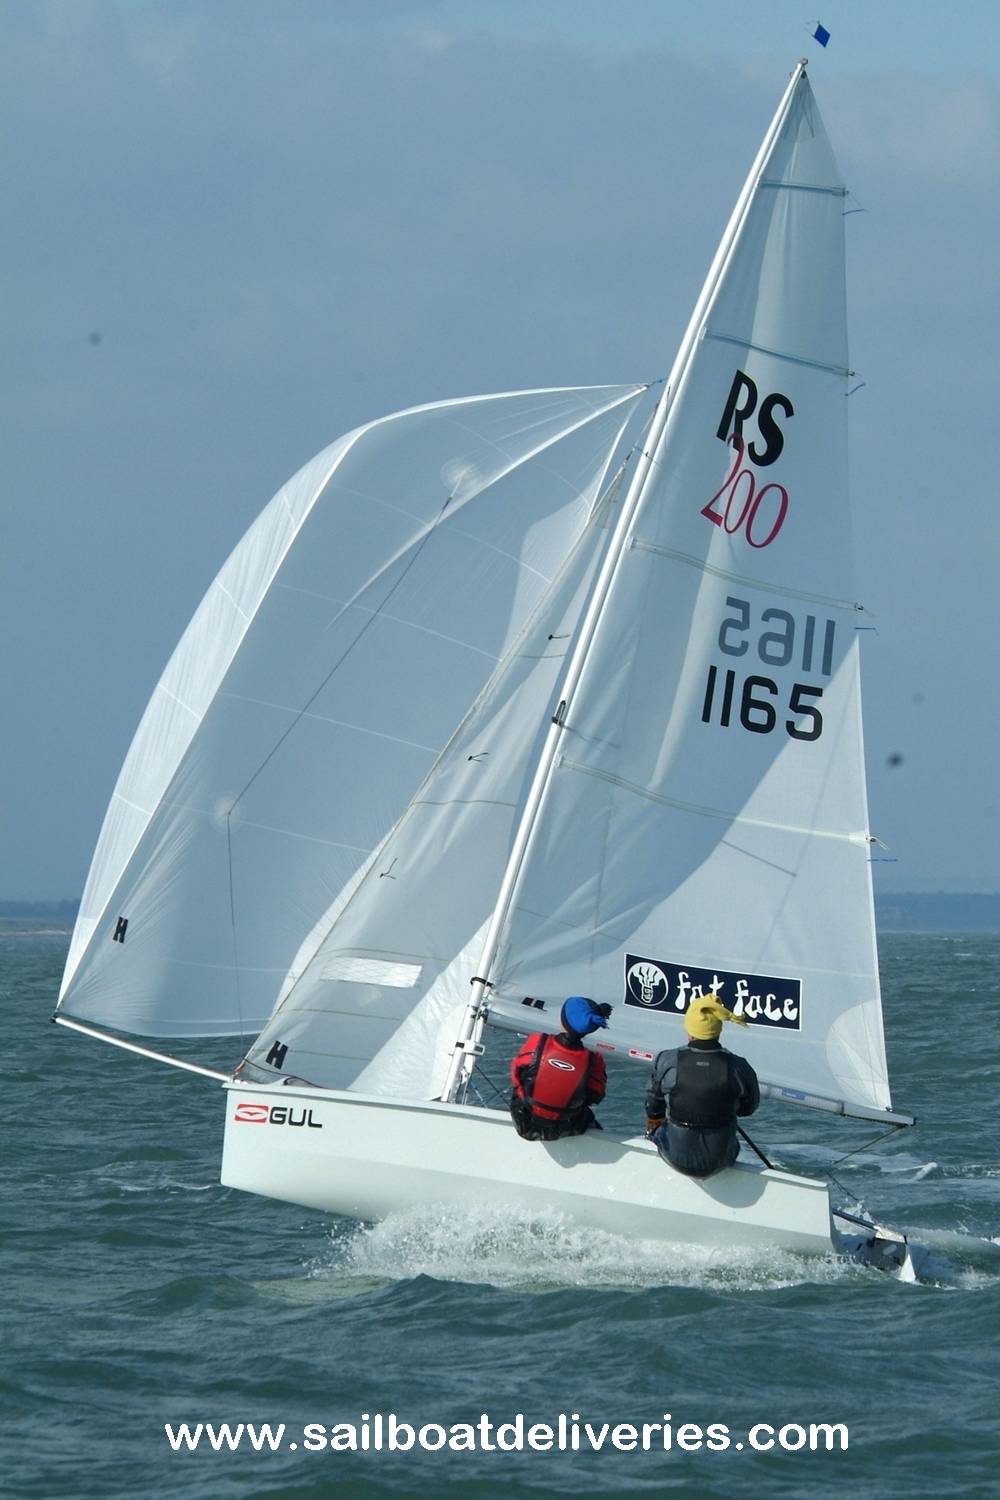 HEAVY WEATHER SAILING RS200 IAN PICKARD AT THE FRONT